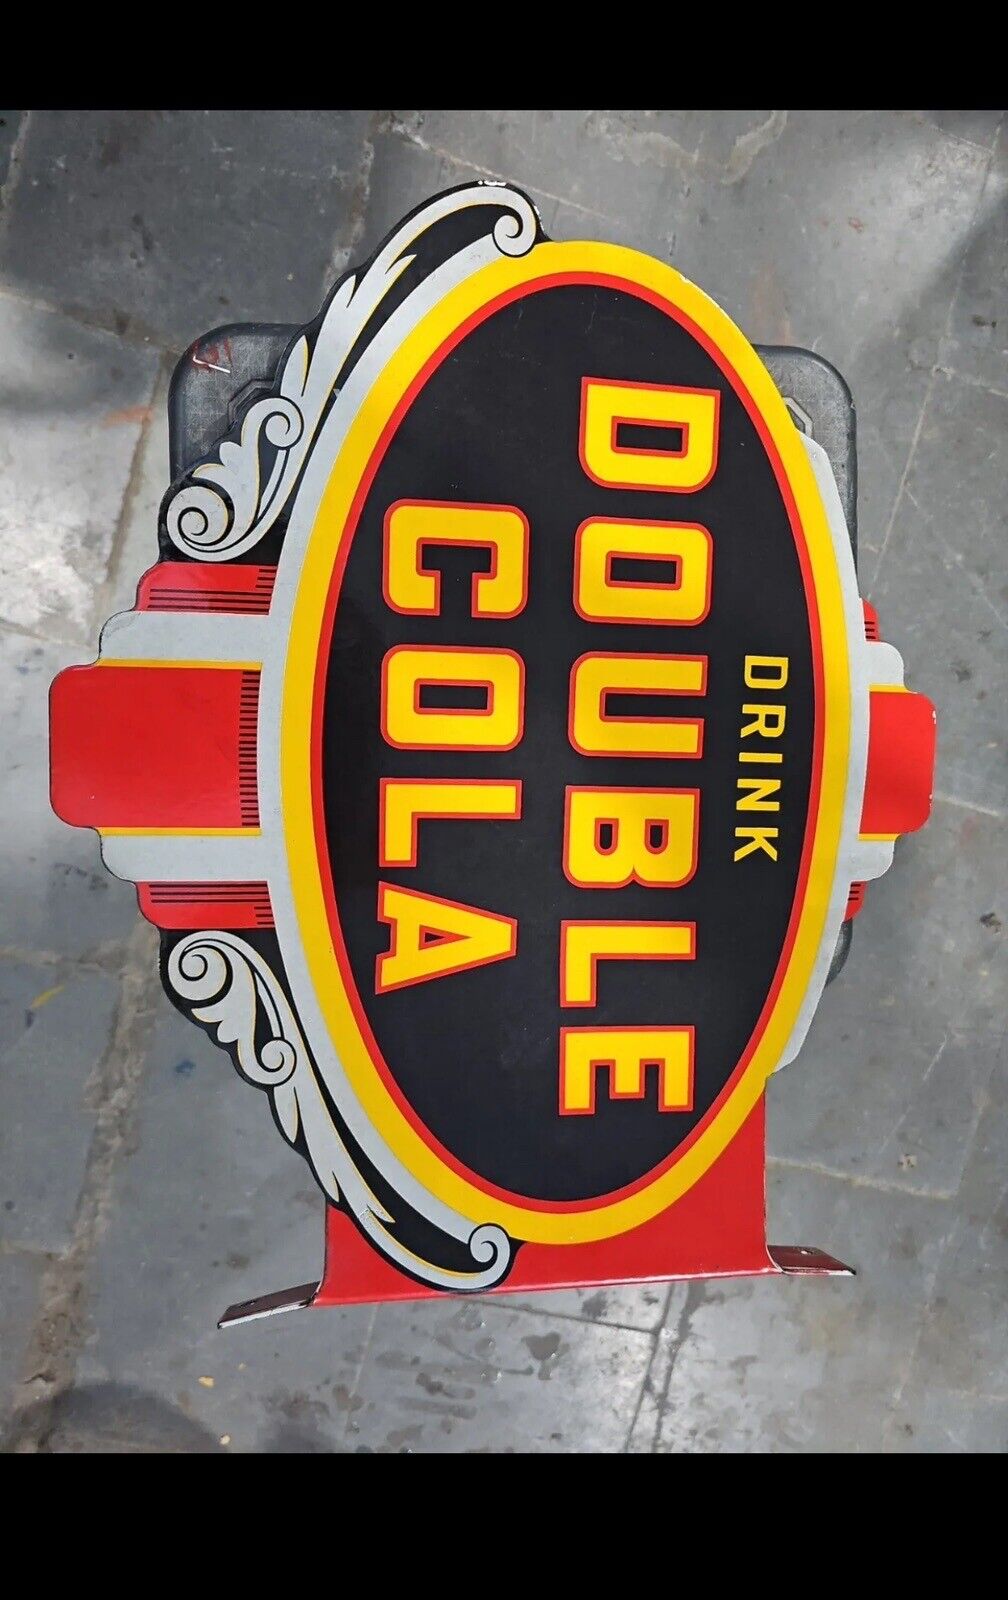 DRINK DOUBLE COLA FLANGE PORCELAIN ENAMEL SIGN 18 X 15 X 2 INCHES  DOUBLE SIDED